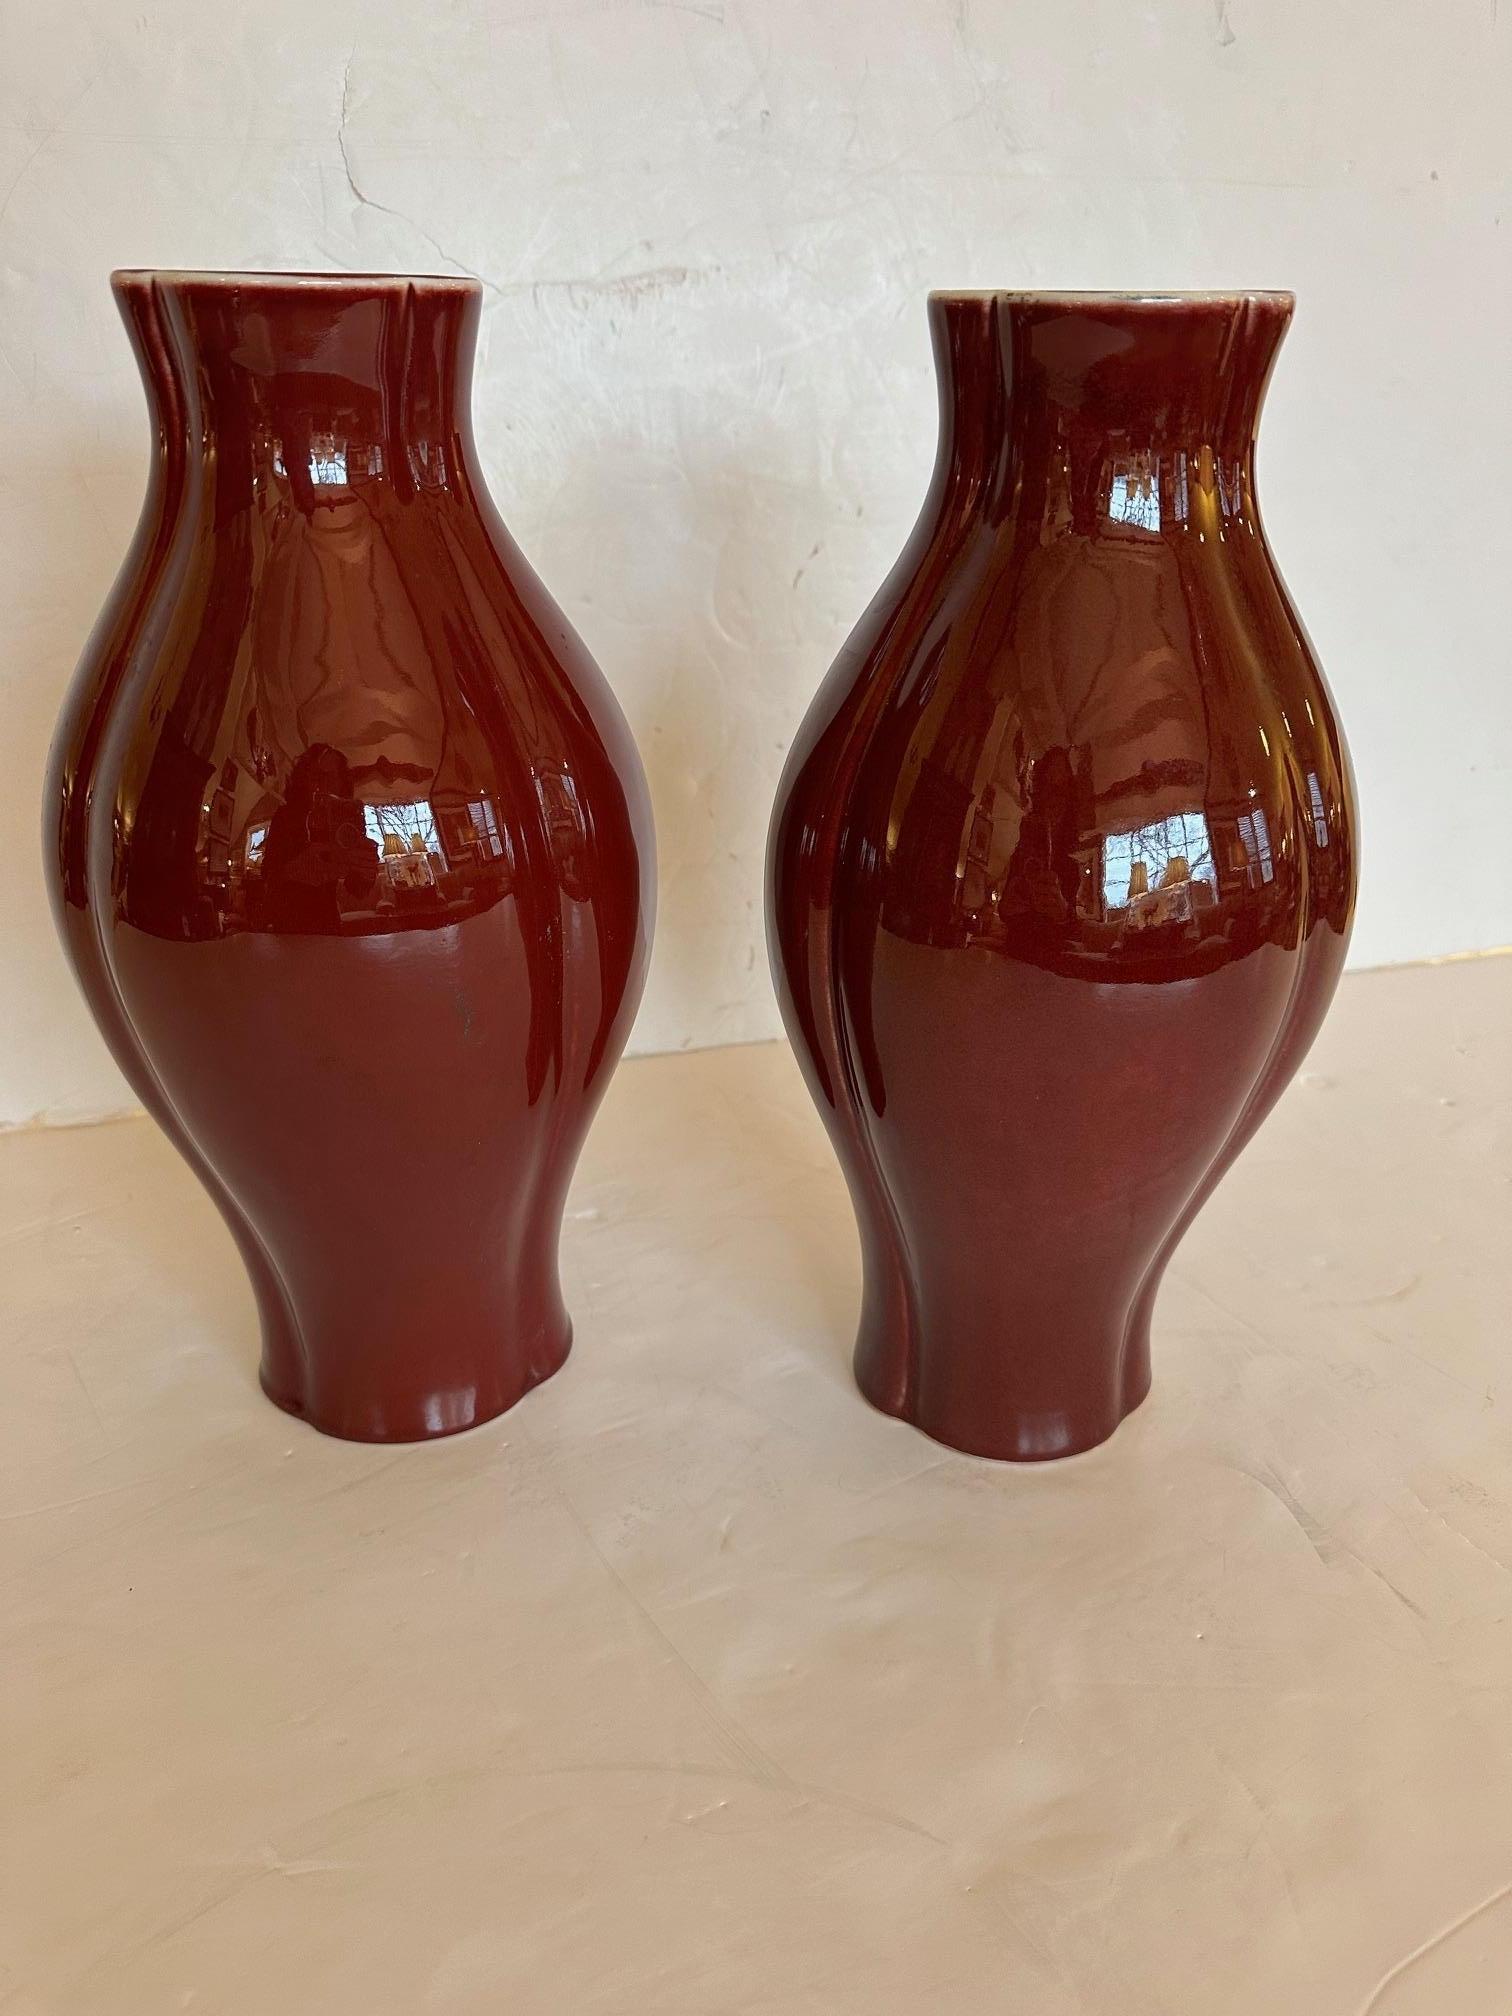 Fetching pair of glossy glazed ox blood color ceramic vases having a lovely scalloped top and bottom.